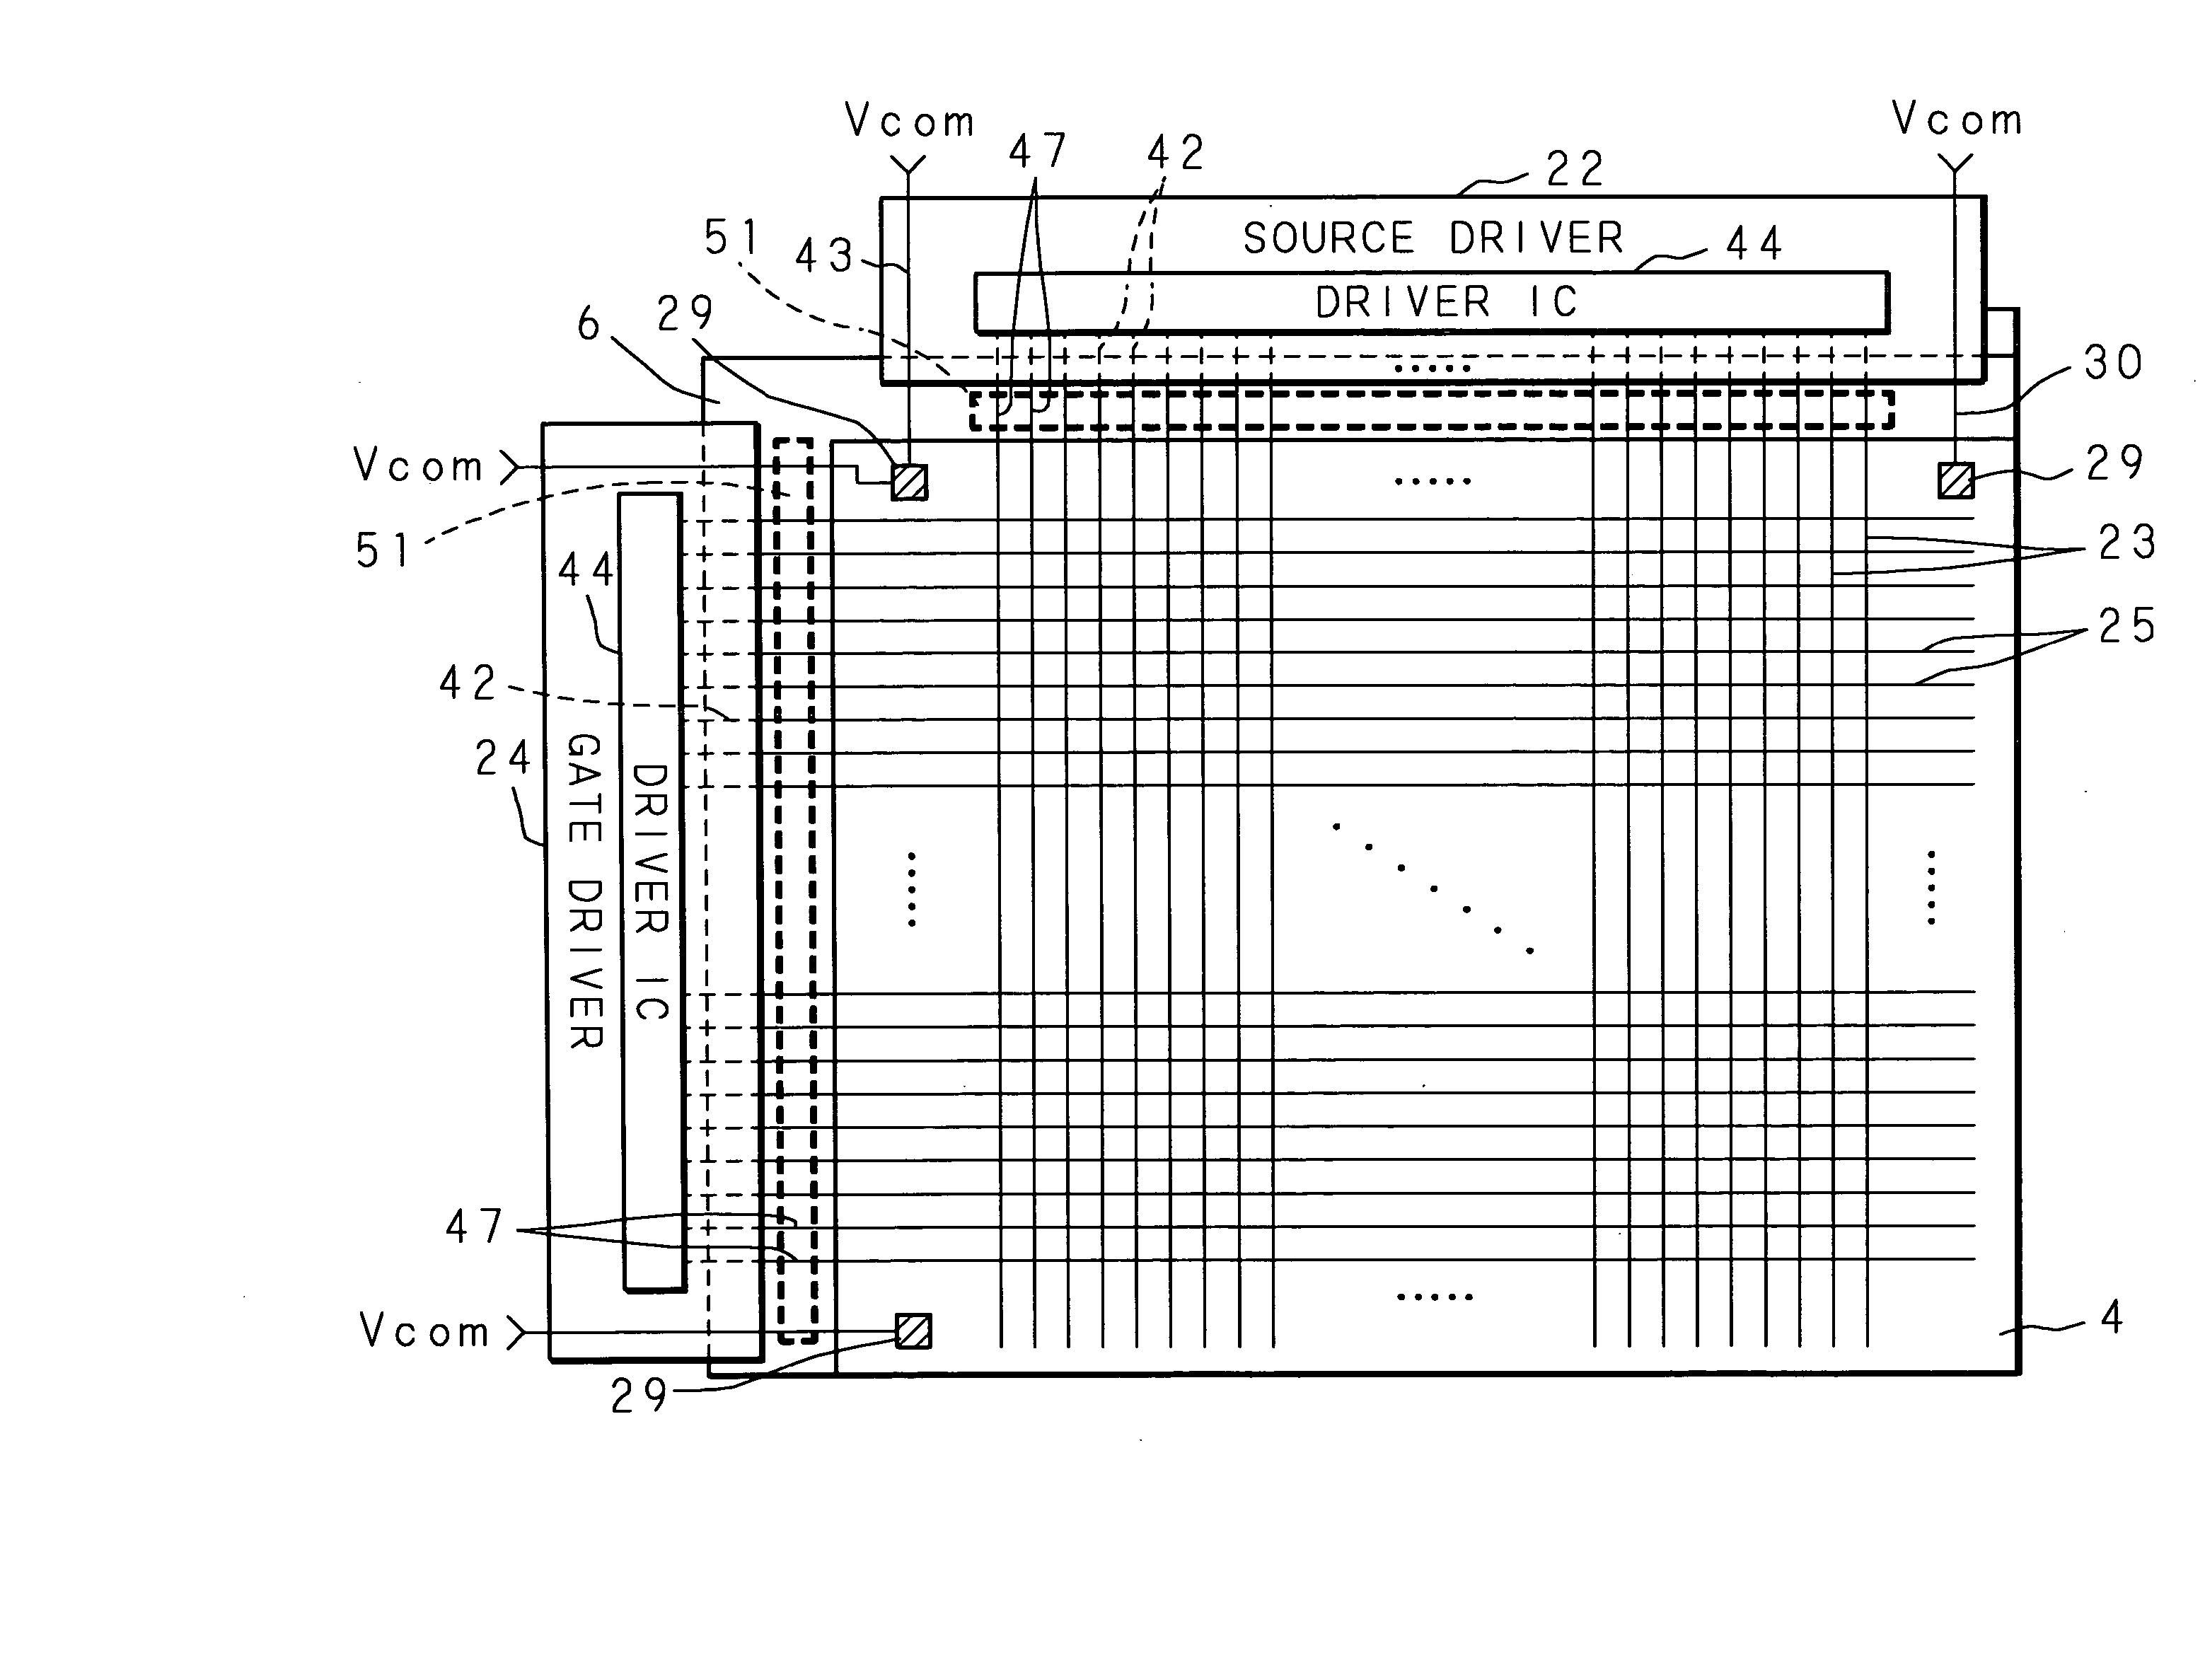 Liquid crystal display device and alignment process method